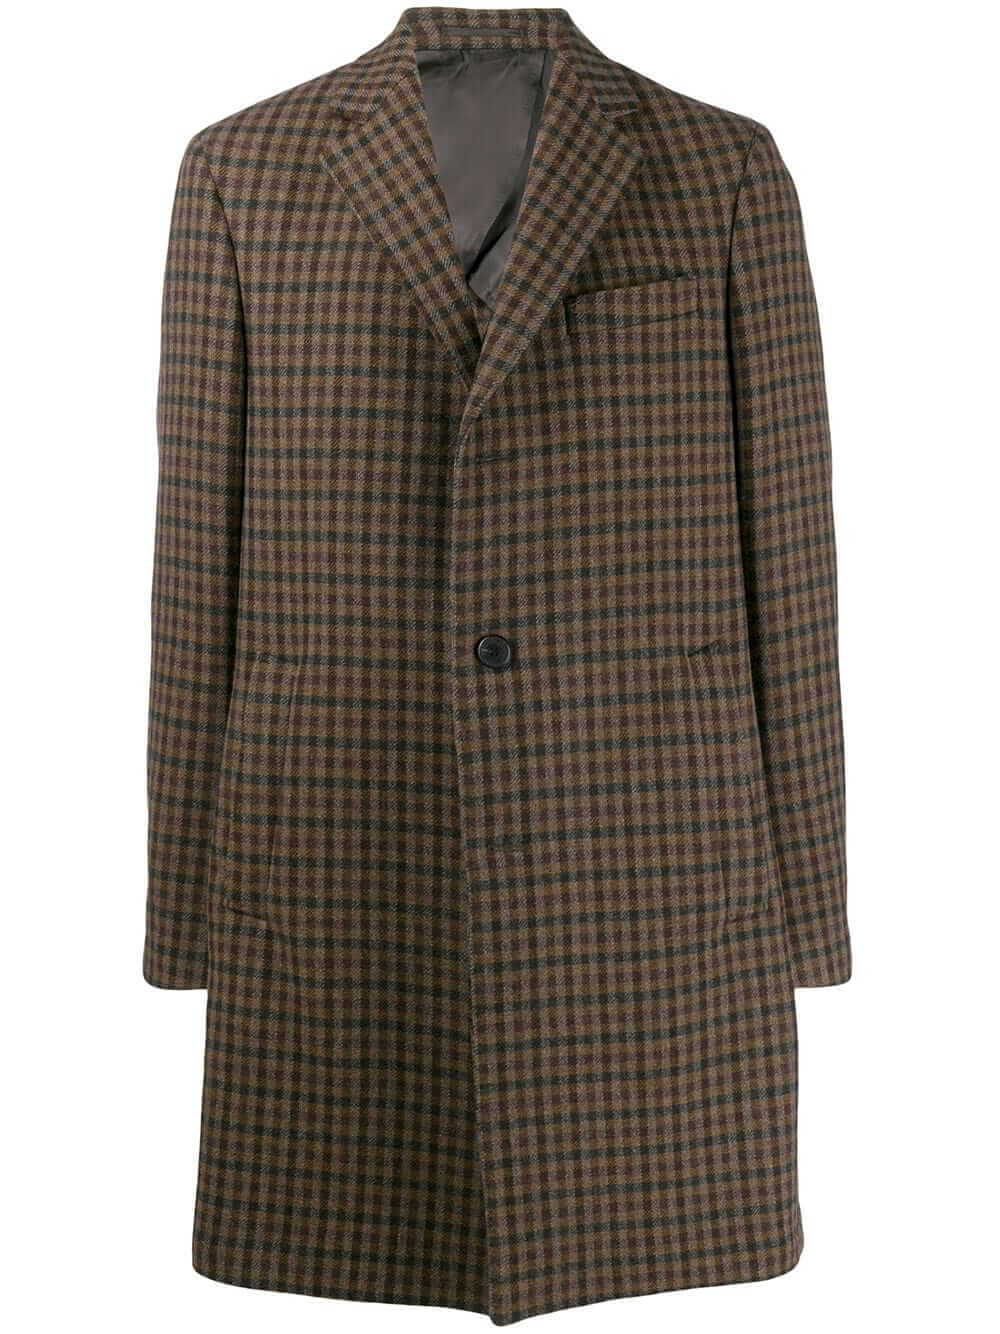 Plaid Coat Codes Men's Special! Adult outfits & items with a chic ...